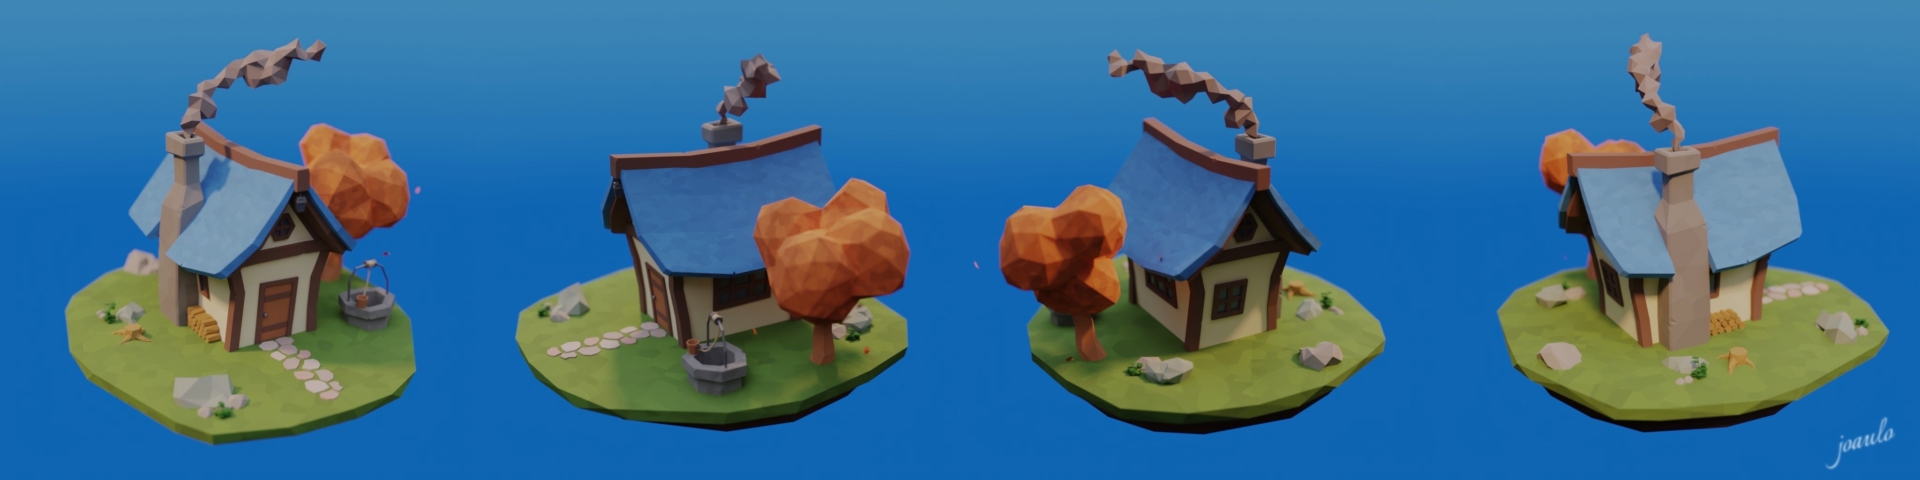 2022-11_lowpoly_cottage_day_c_1k_s